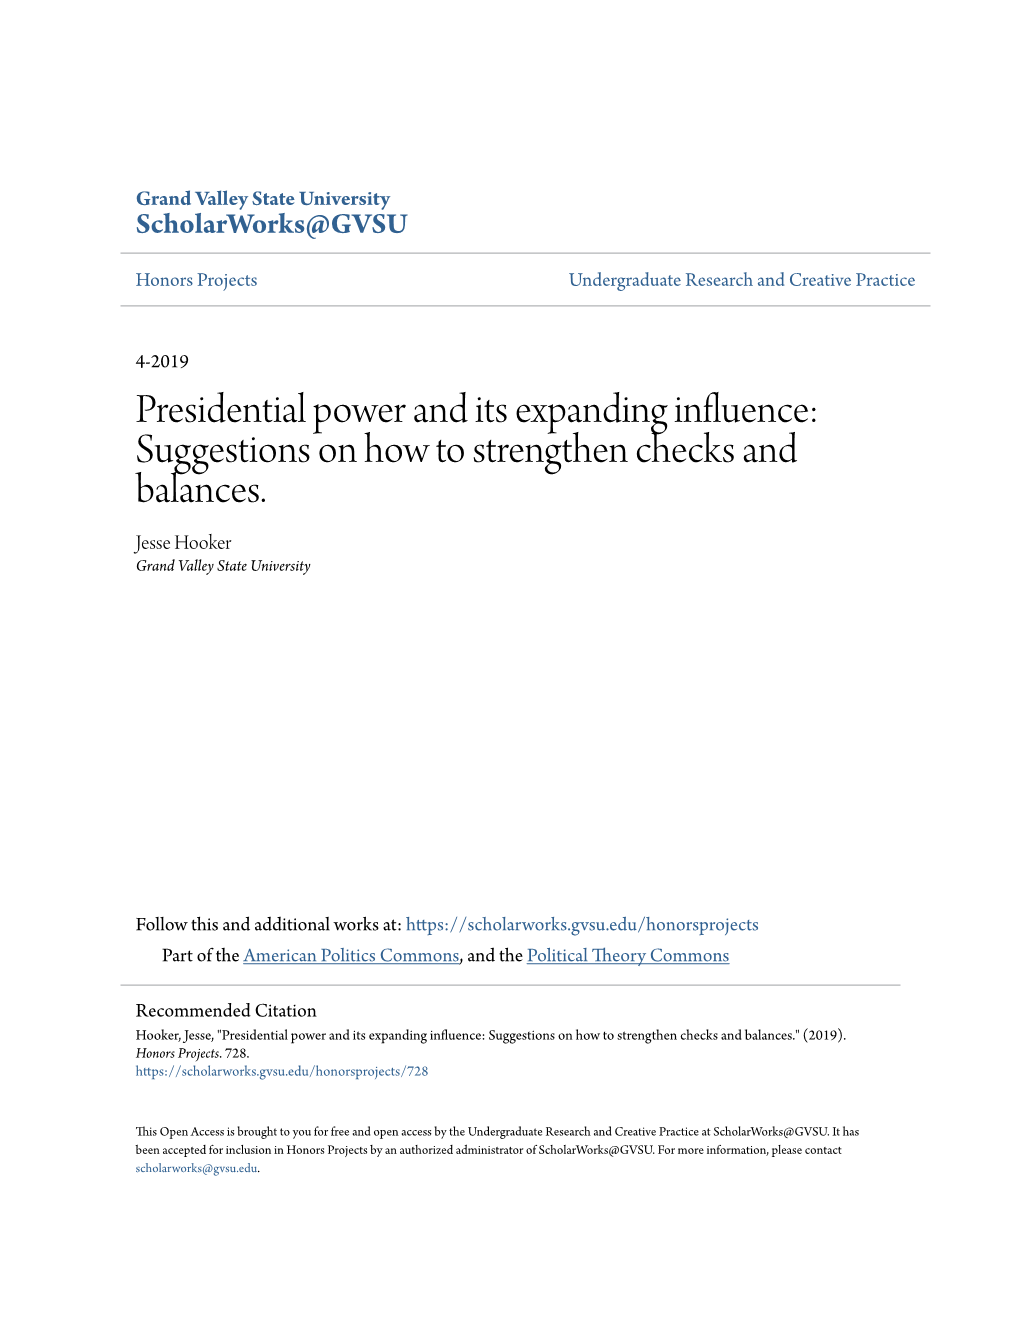 Presidential Power and Its Expanding Influence: Suggestions on How to Strengthen Checks and Balances